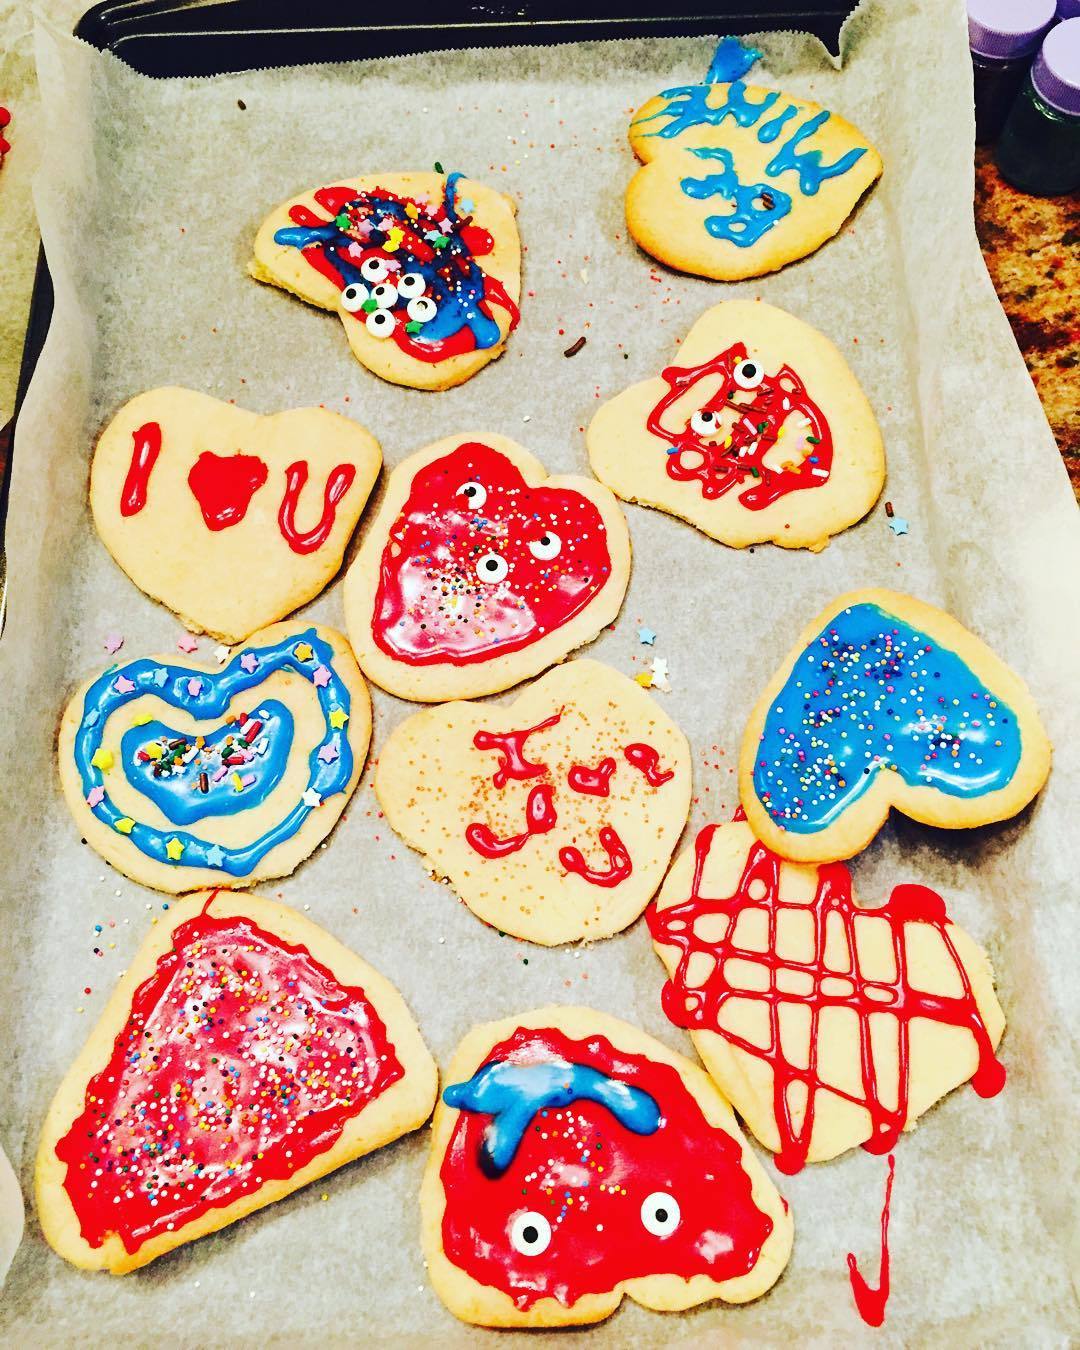 Family feast! And our attempt at valentines days cookies. Pathetic but so yummy!!